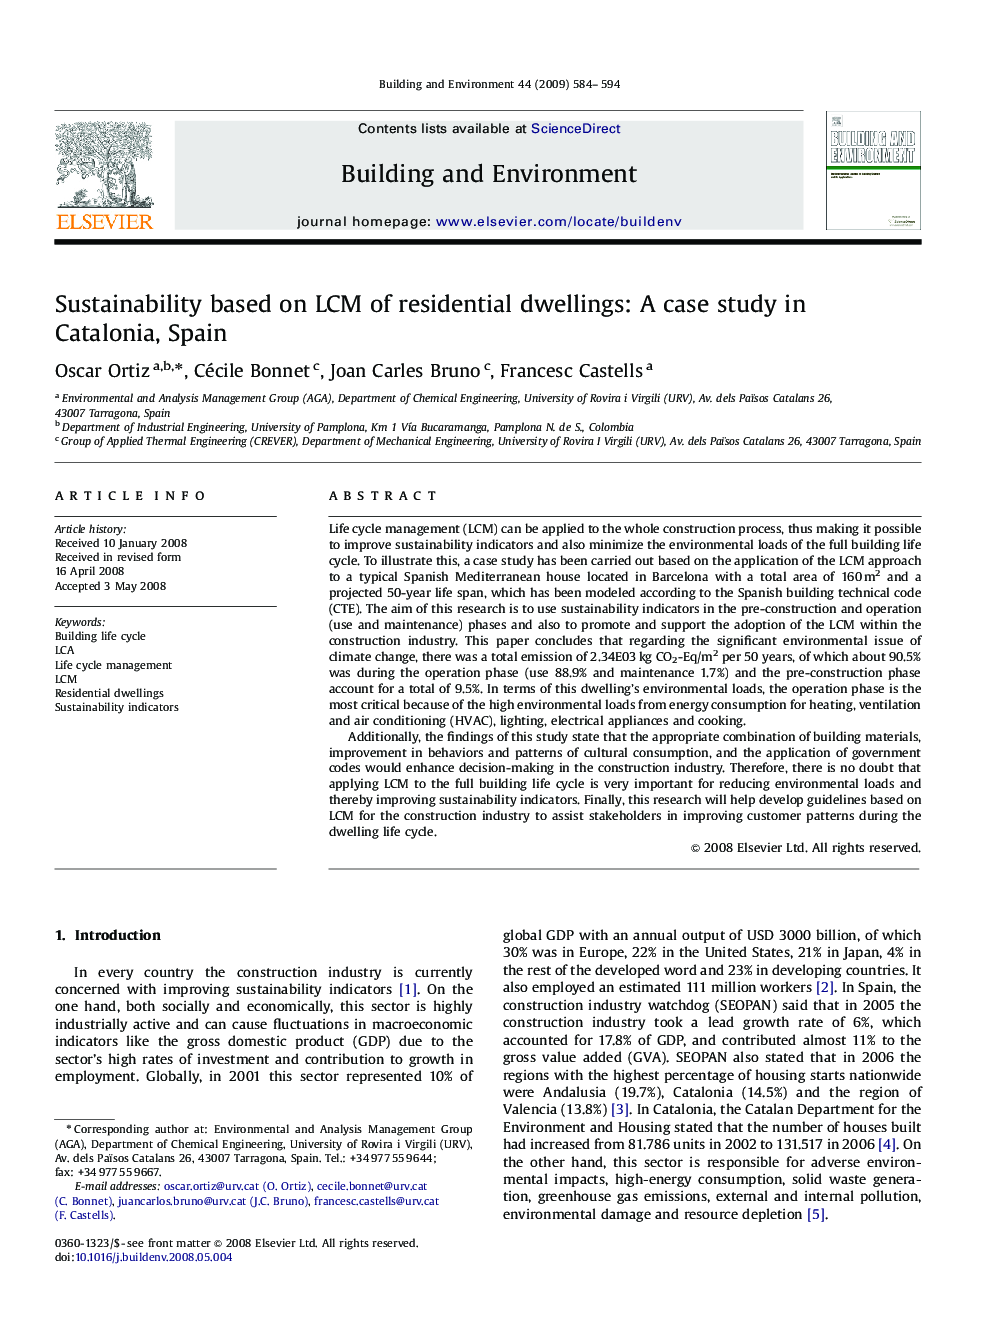 Sustainability based on LCM of residential dwellings: A case study in Catalonia, Spain